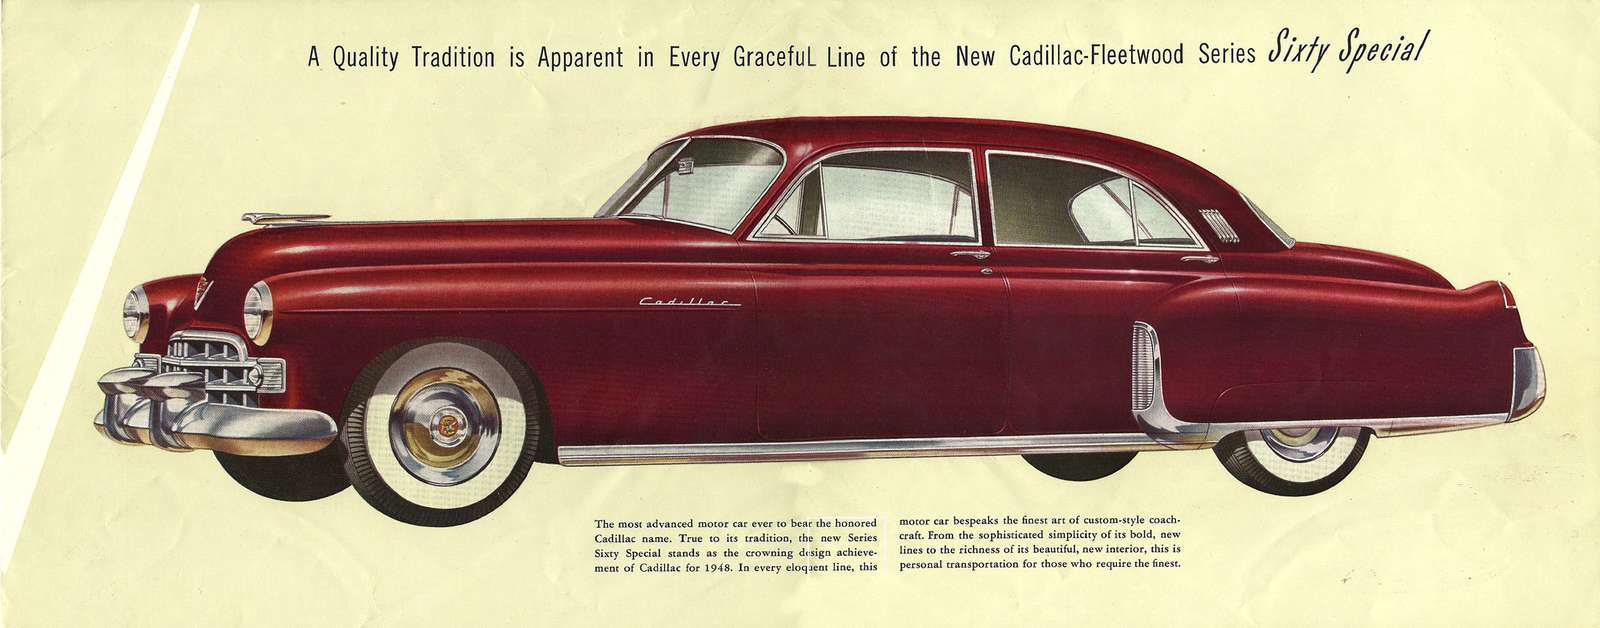 Cadillac rot gjhyyop Online-Puzzle vom Foto